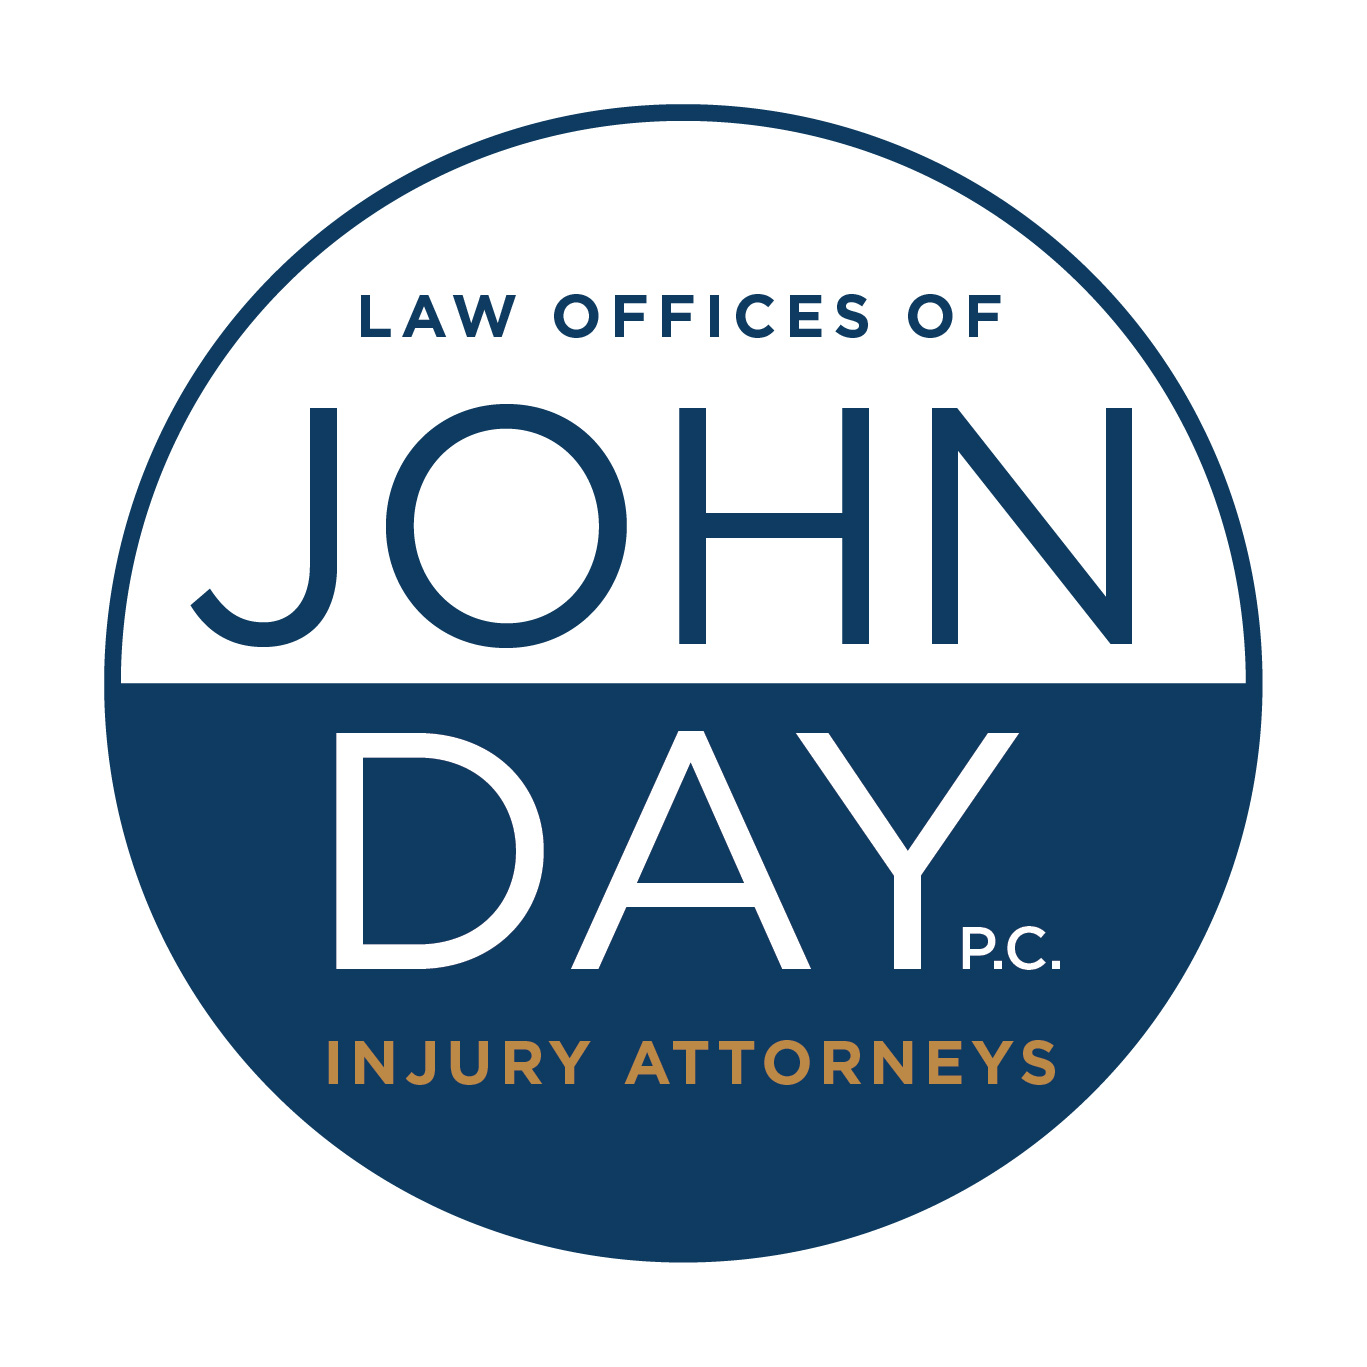 Law Offices of John Day P.C. Injury Attorneys logo